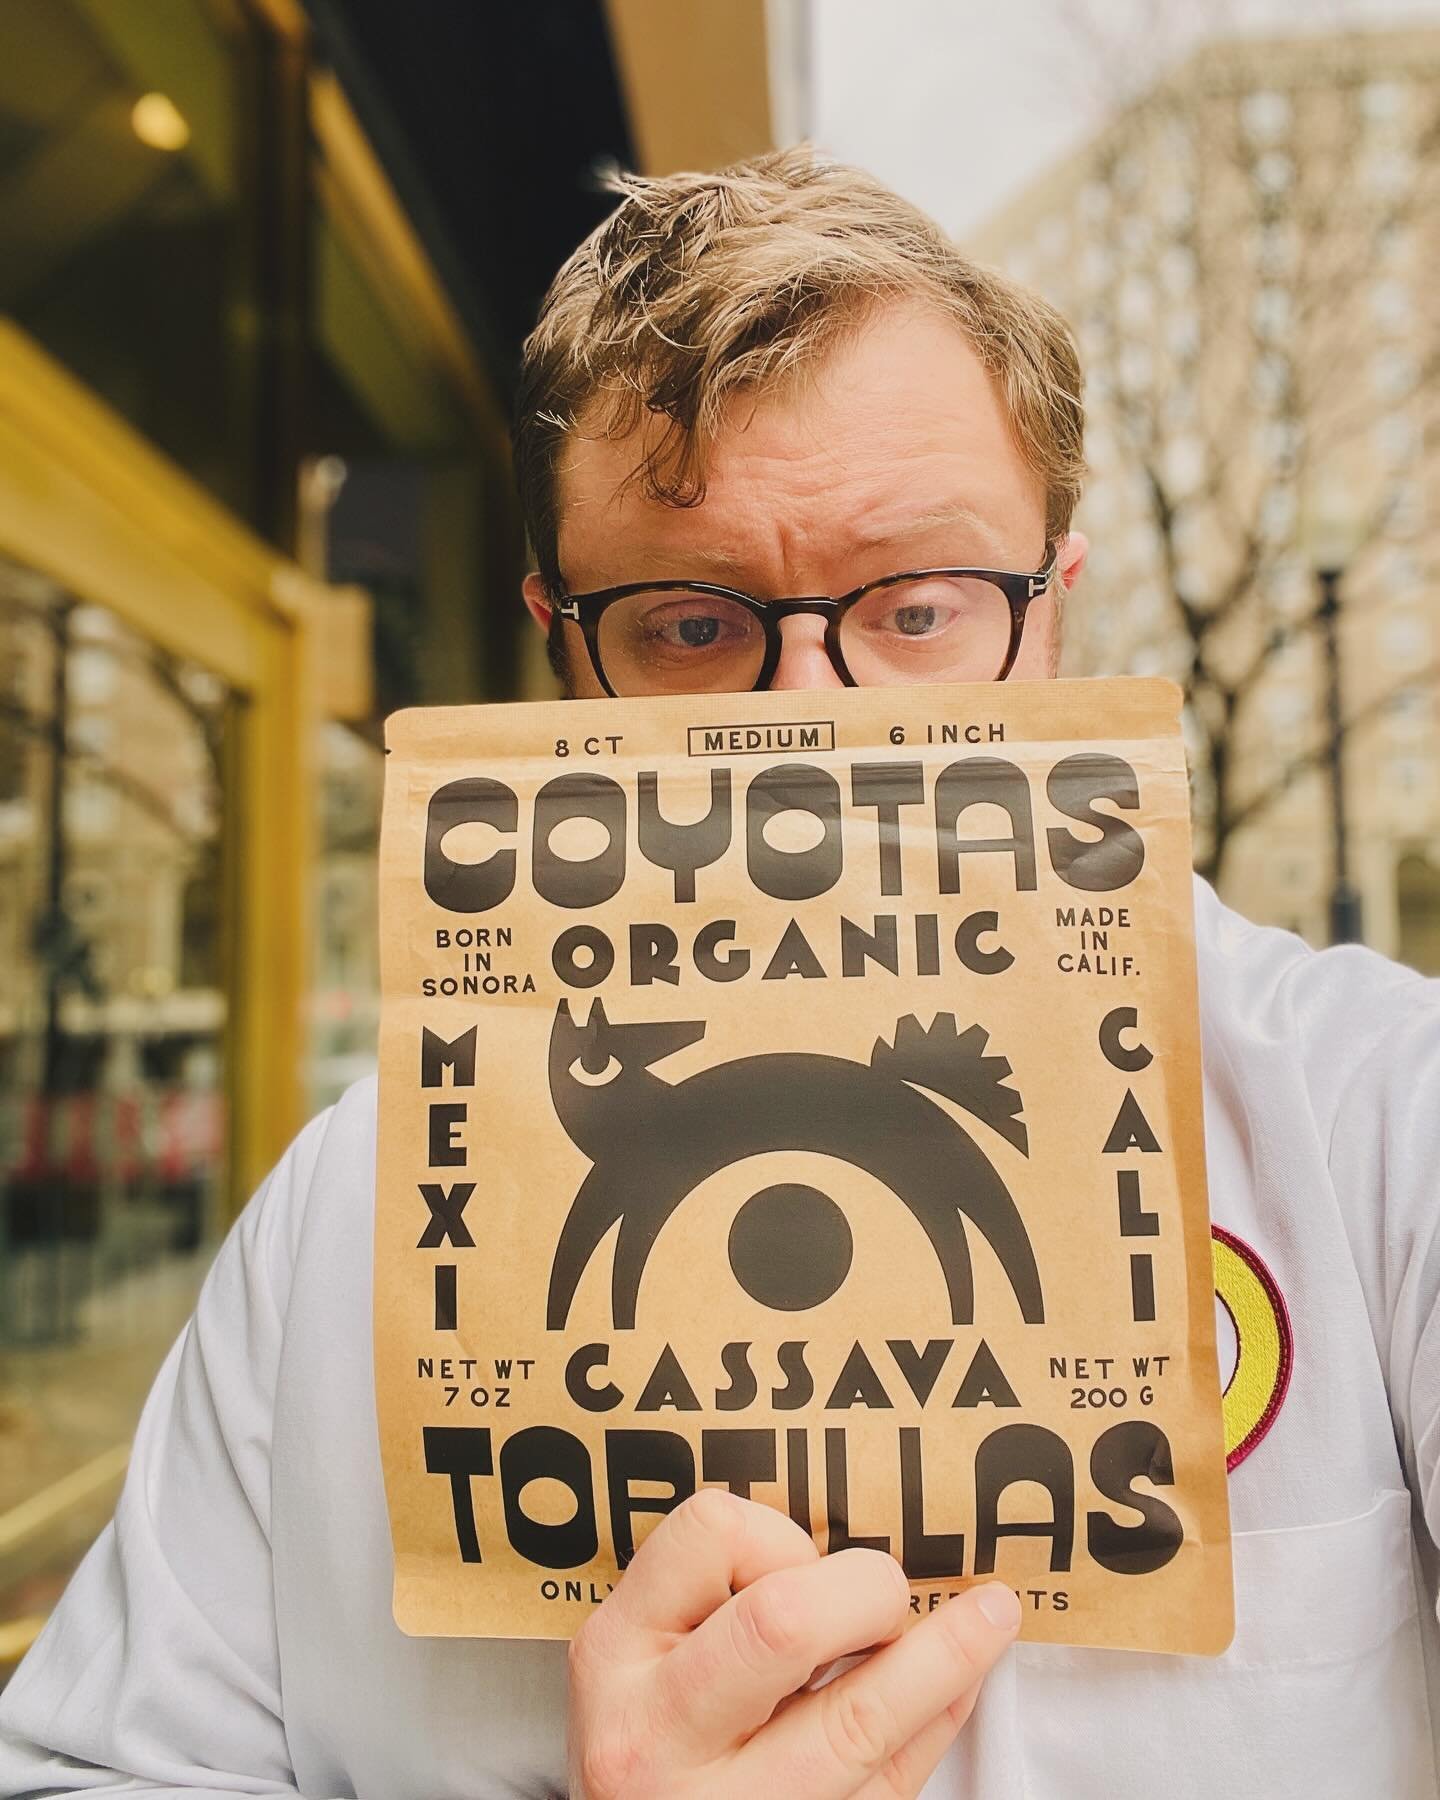 Look at what snuck in the door - new tortillas from @eatcoyotas ! Inspired by the traditional Sonoran flour tortillas that dominate the north of Mexico, these soft and fluffy wonders are made to be a little more friendly. Naturally gluten-free thanks